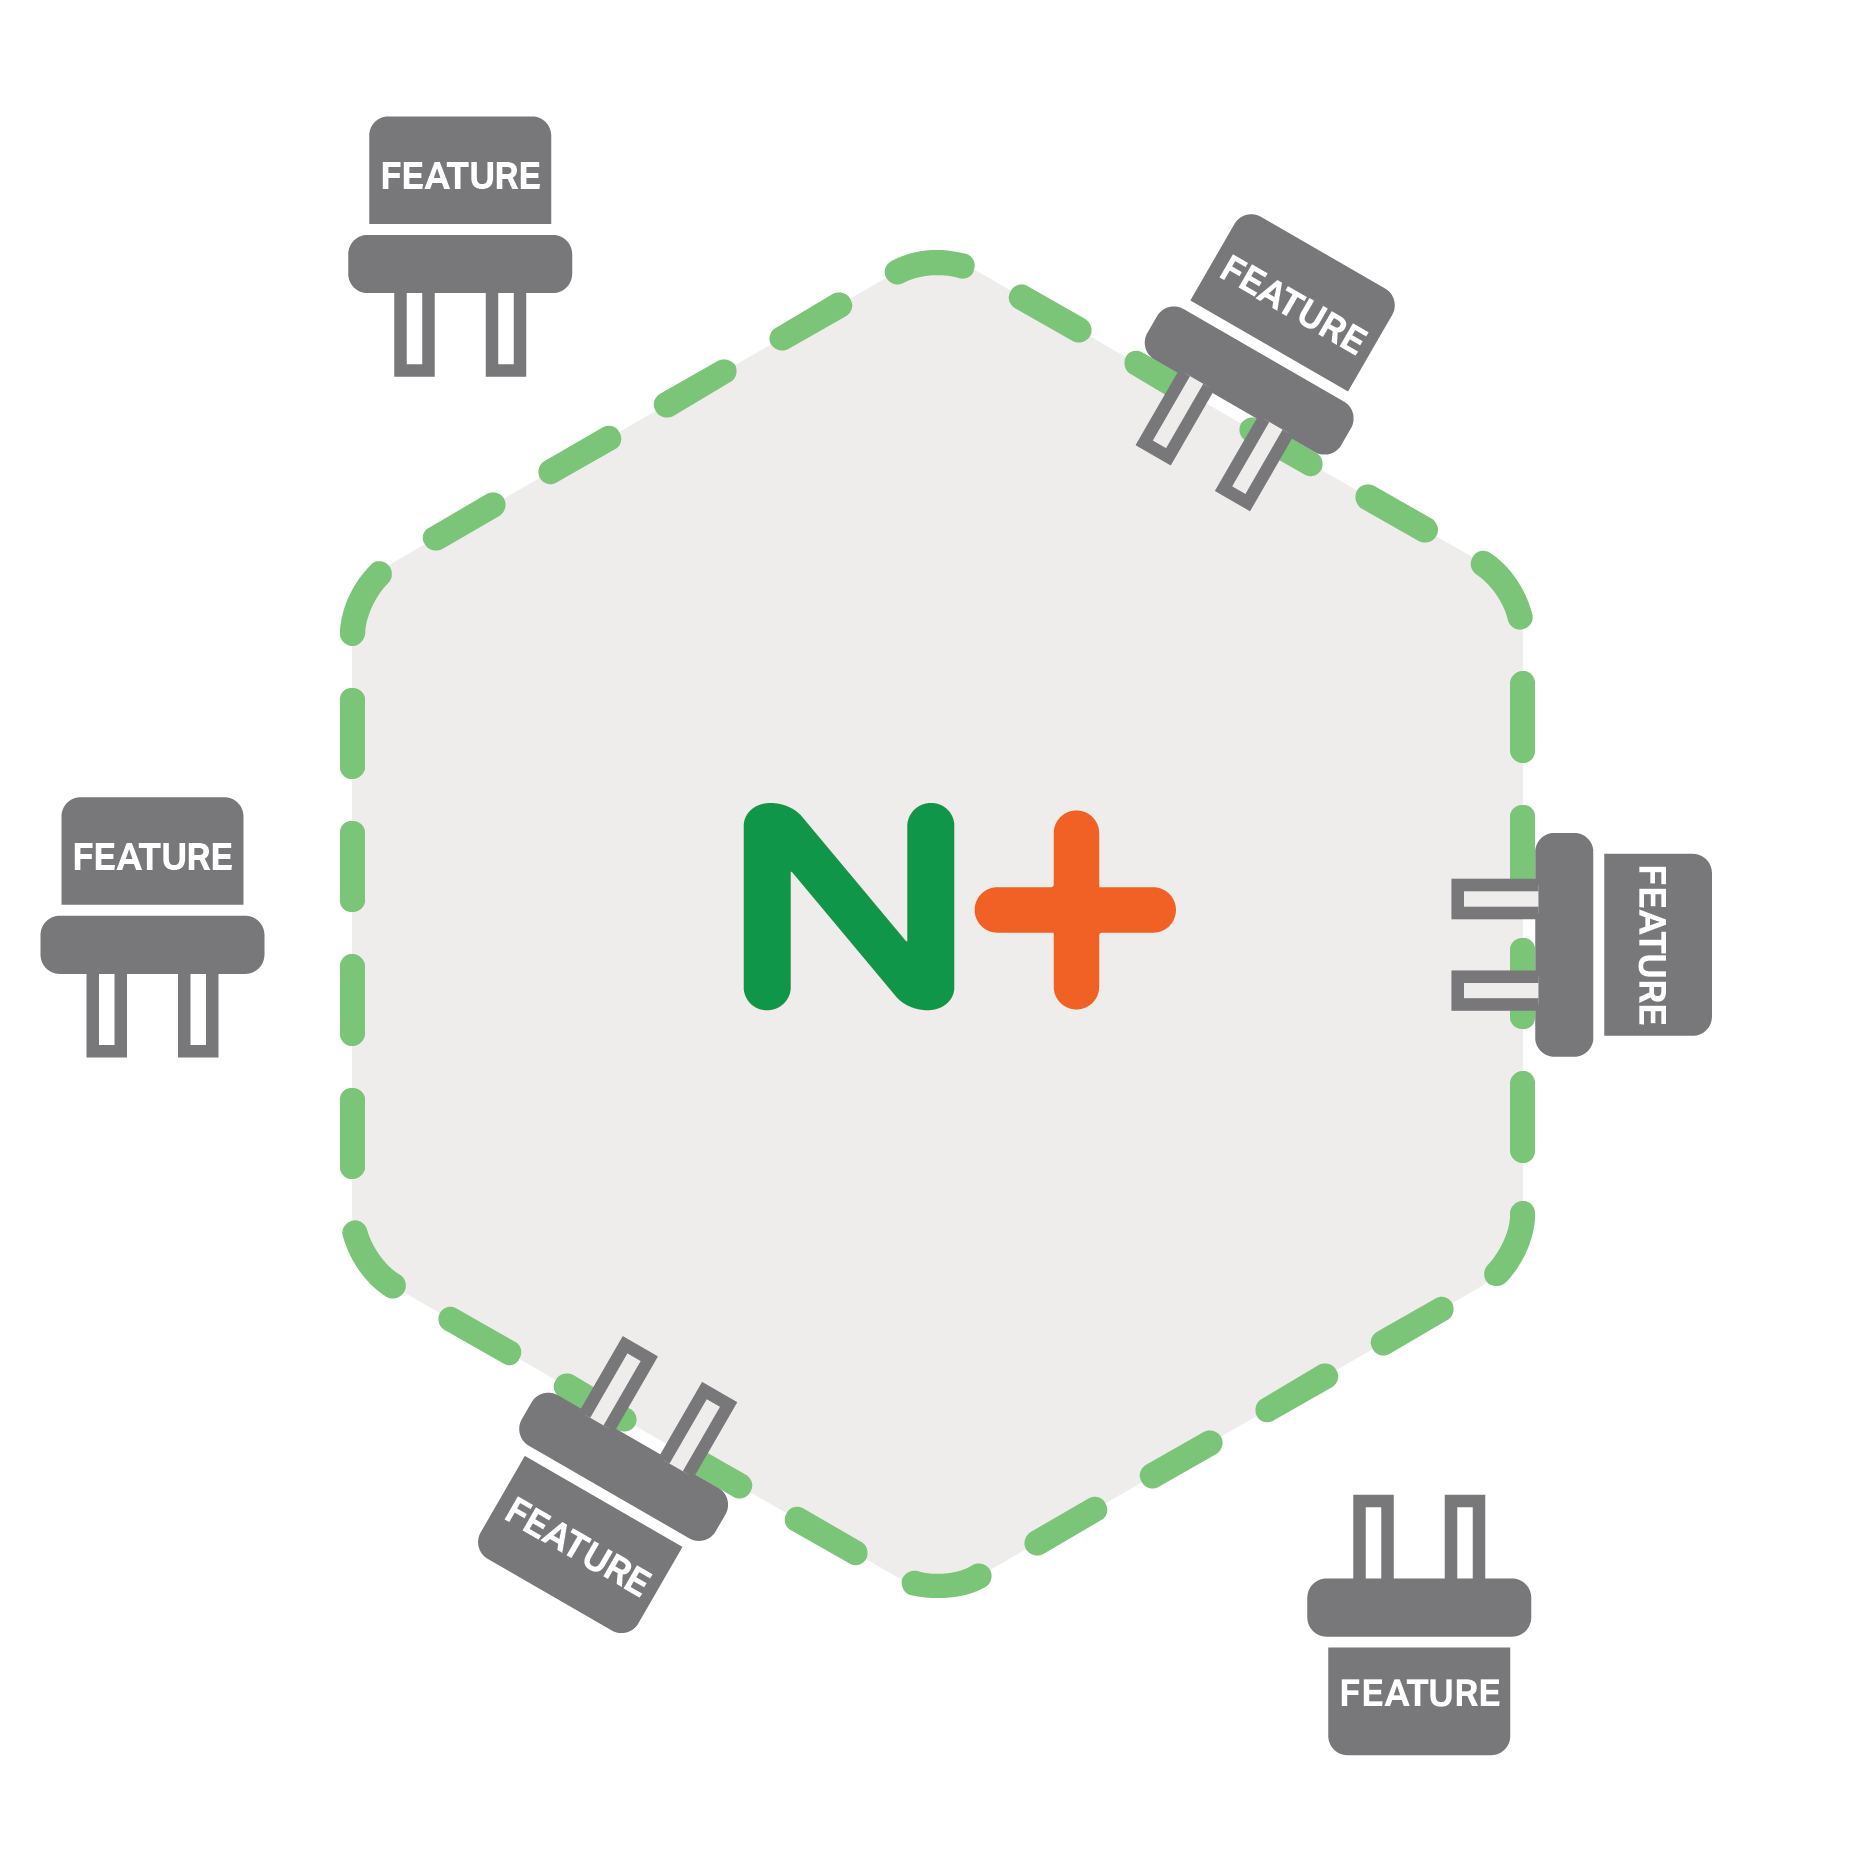 NGINX Plus allows features to be plugged in on demand